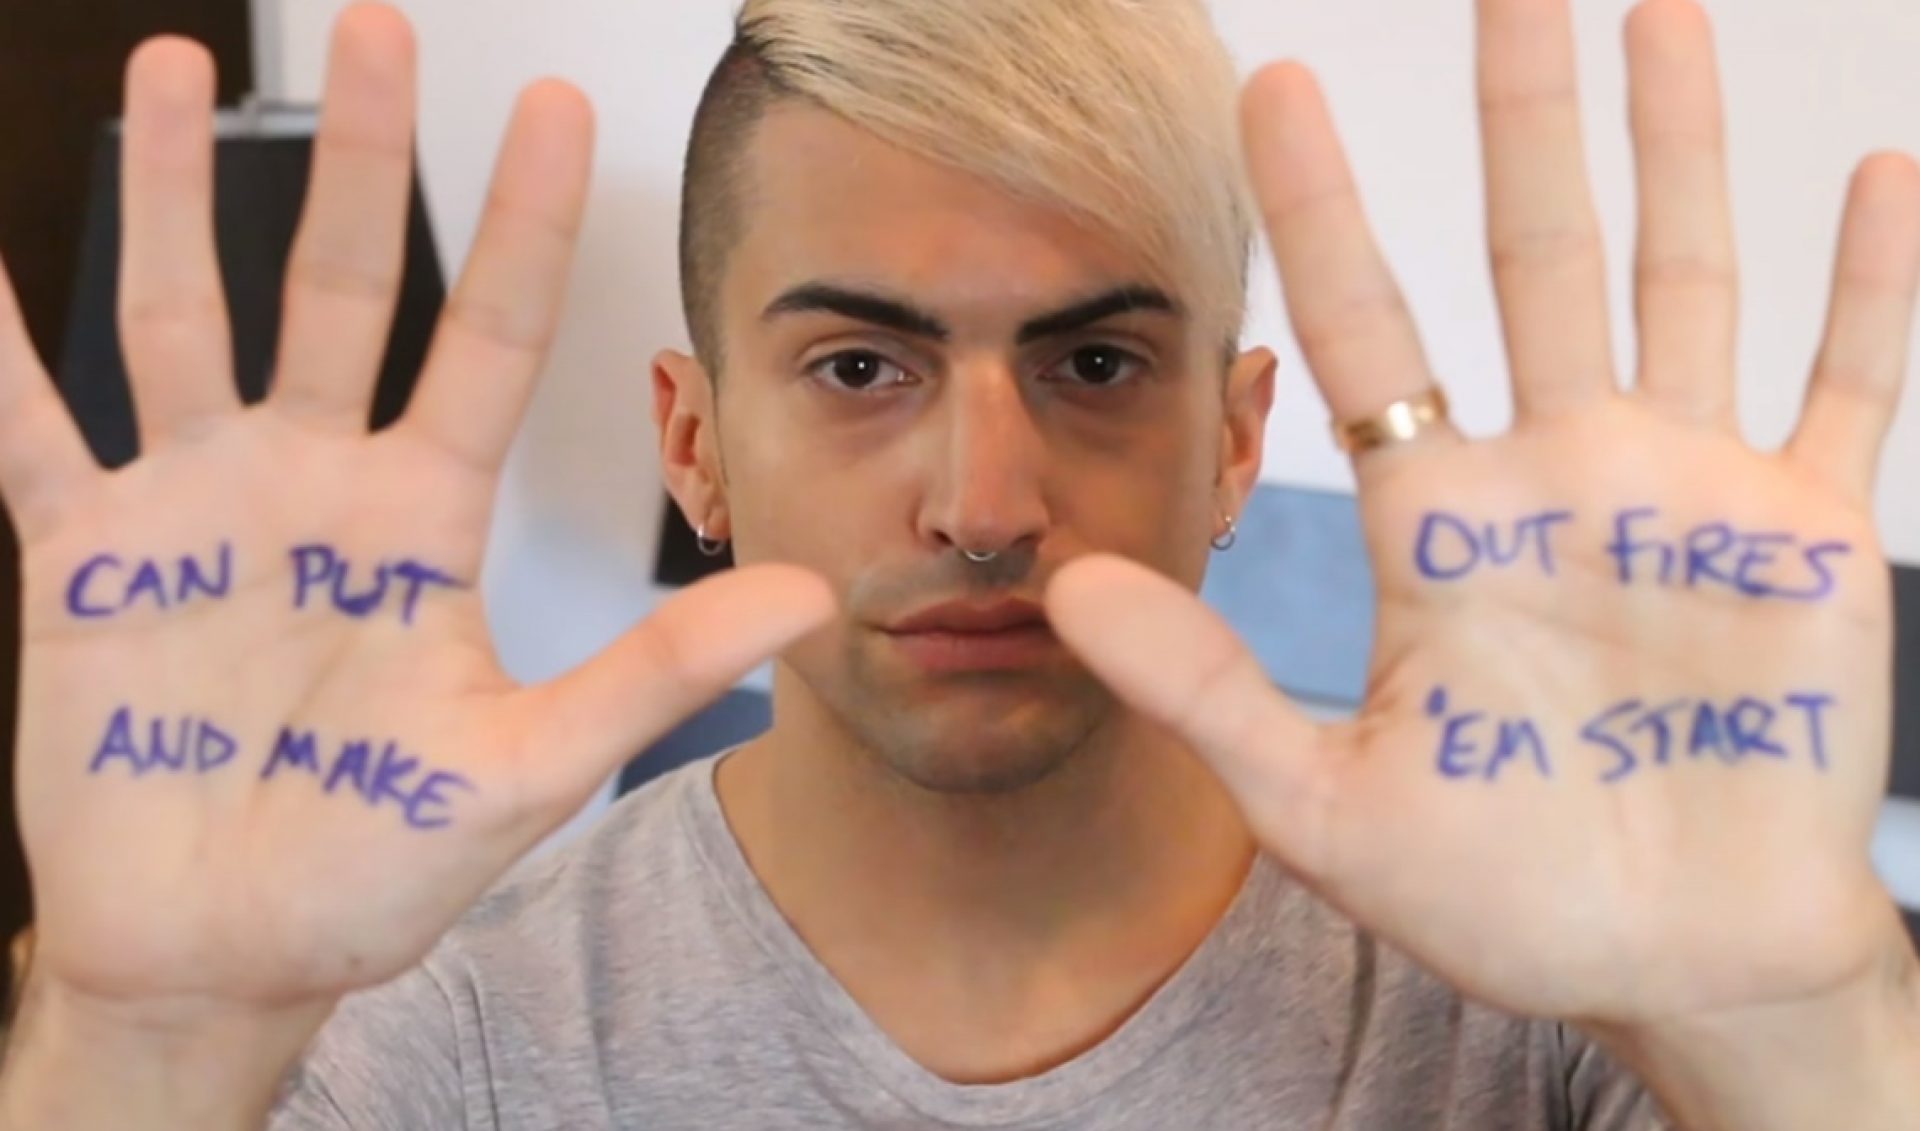 YouTube Stars Raise Their “Hands” In Memory Of Orlando Victims